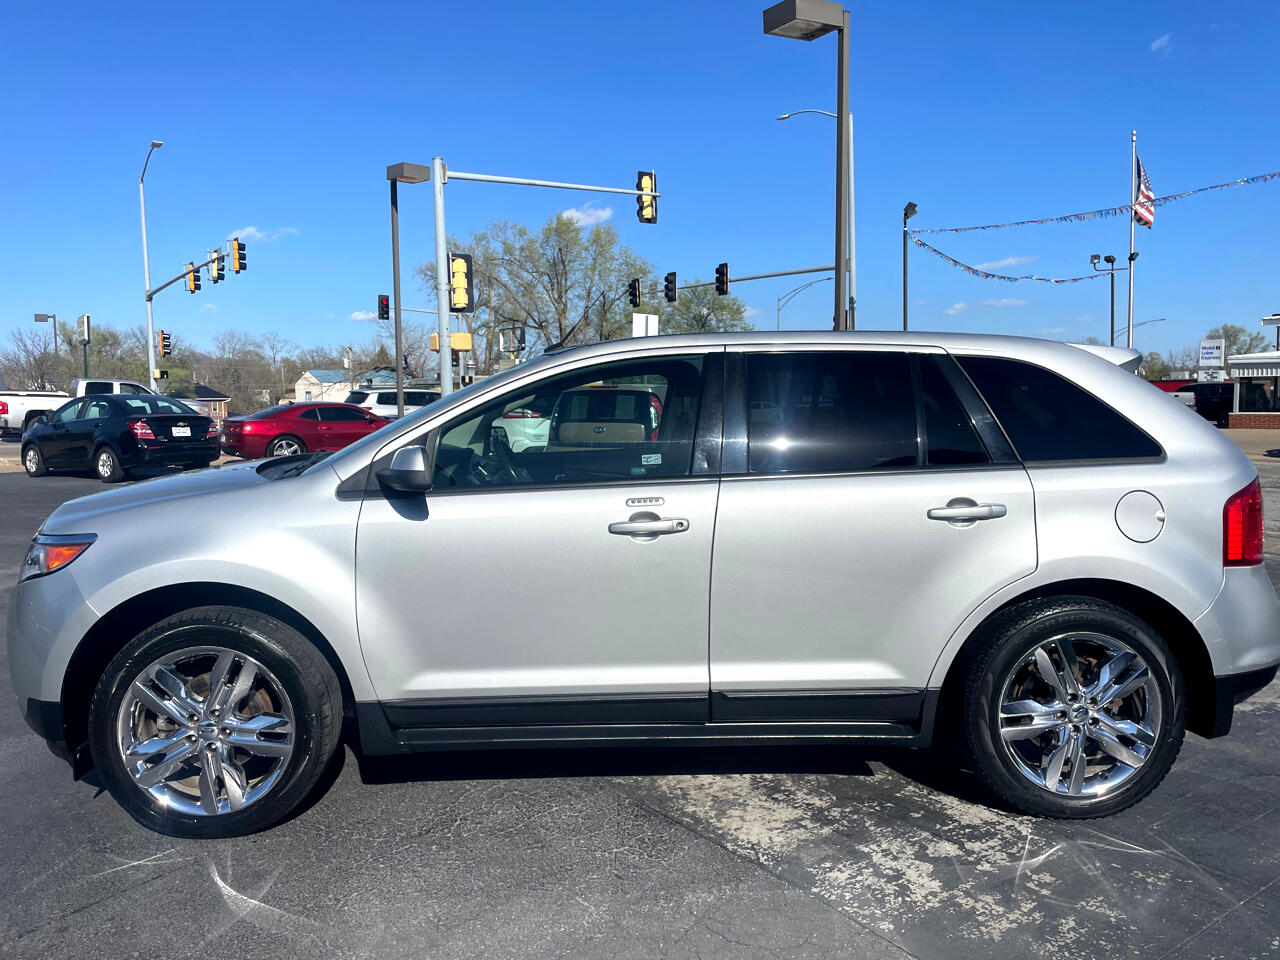 2012 Ford Edge SEL FWD